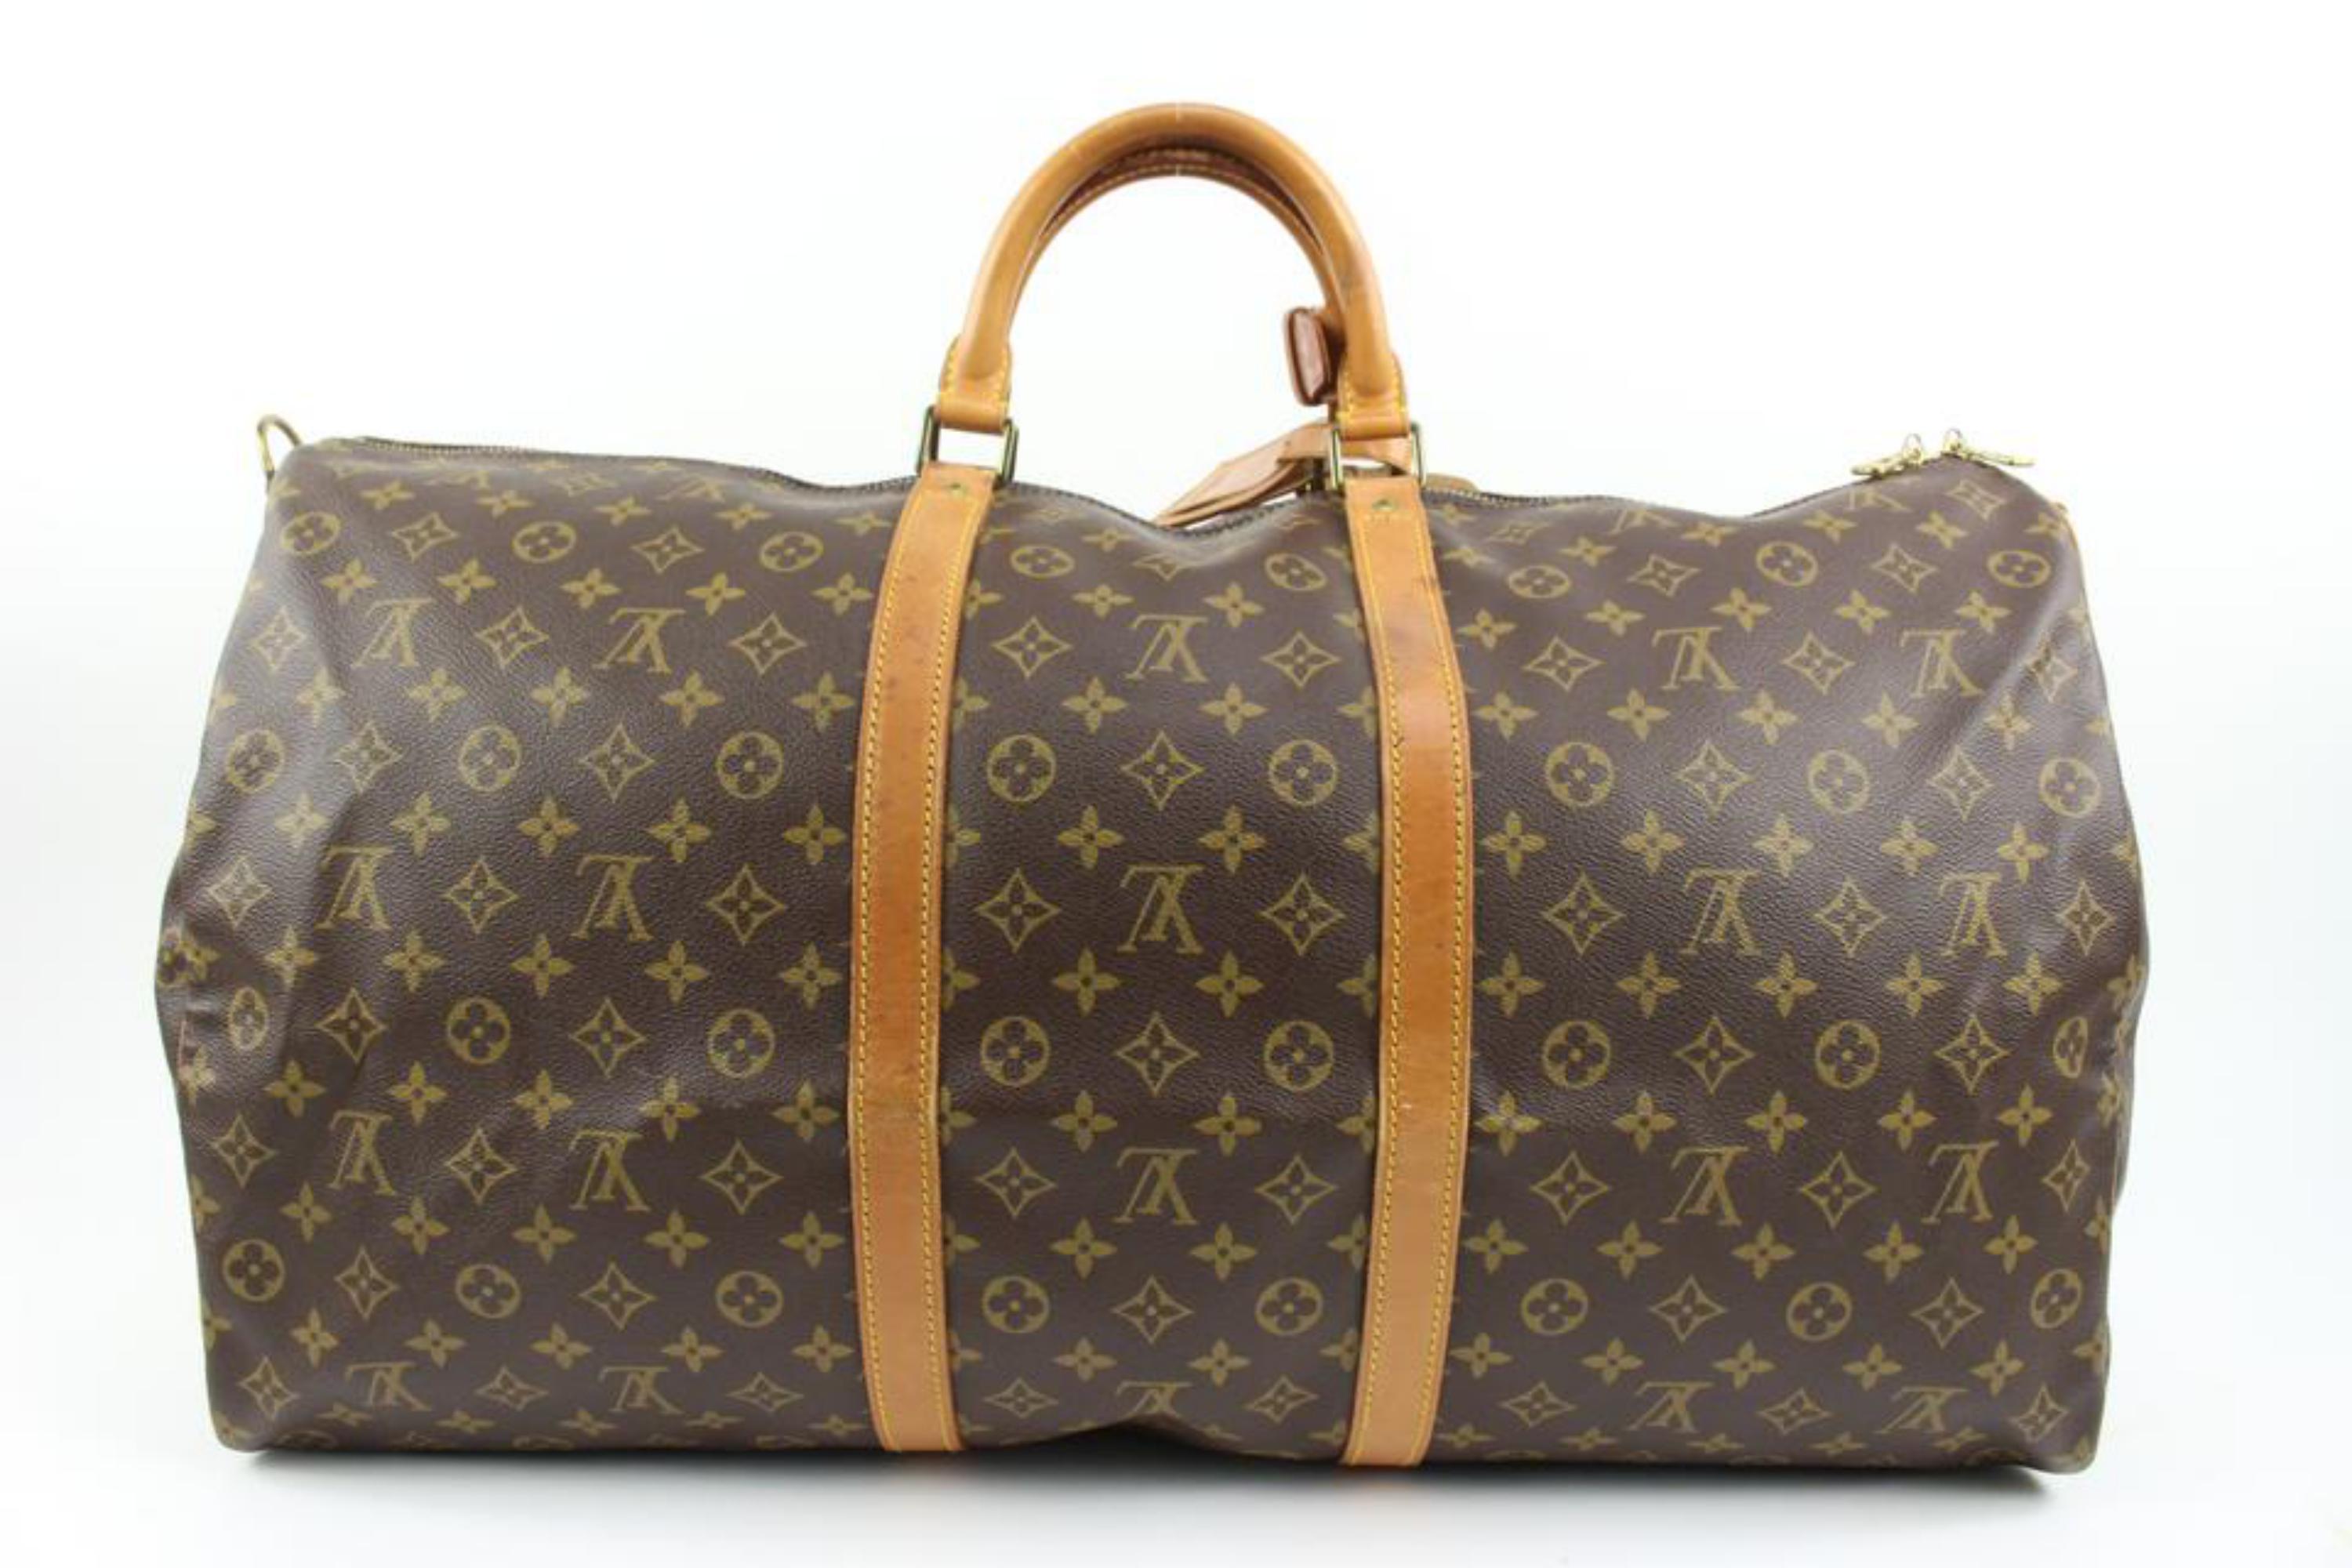 Louis Vuitton Monogram Keepall Bandouliere 60 Duffle Bag with Strap 60lv218s 1